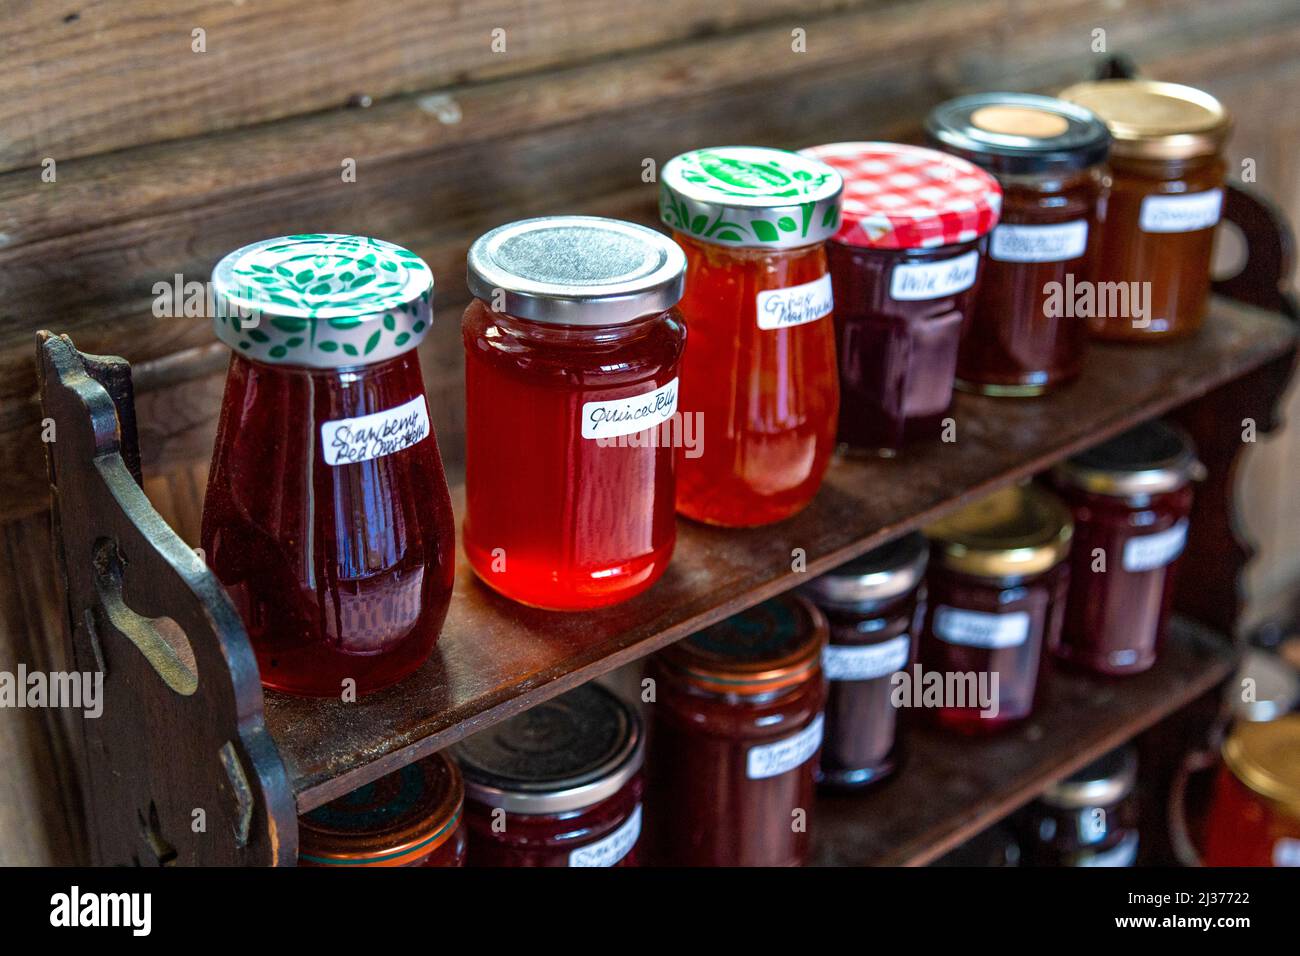 Home-made jams and preserves (honesty box at the porch of St Mary The Virgin church in Great Wymondley, Hertfordshire, UK) Stock Photo